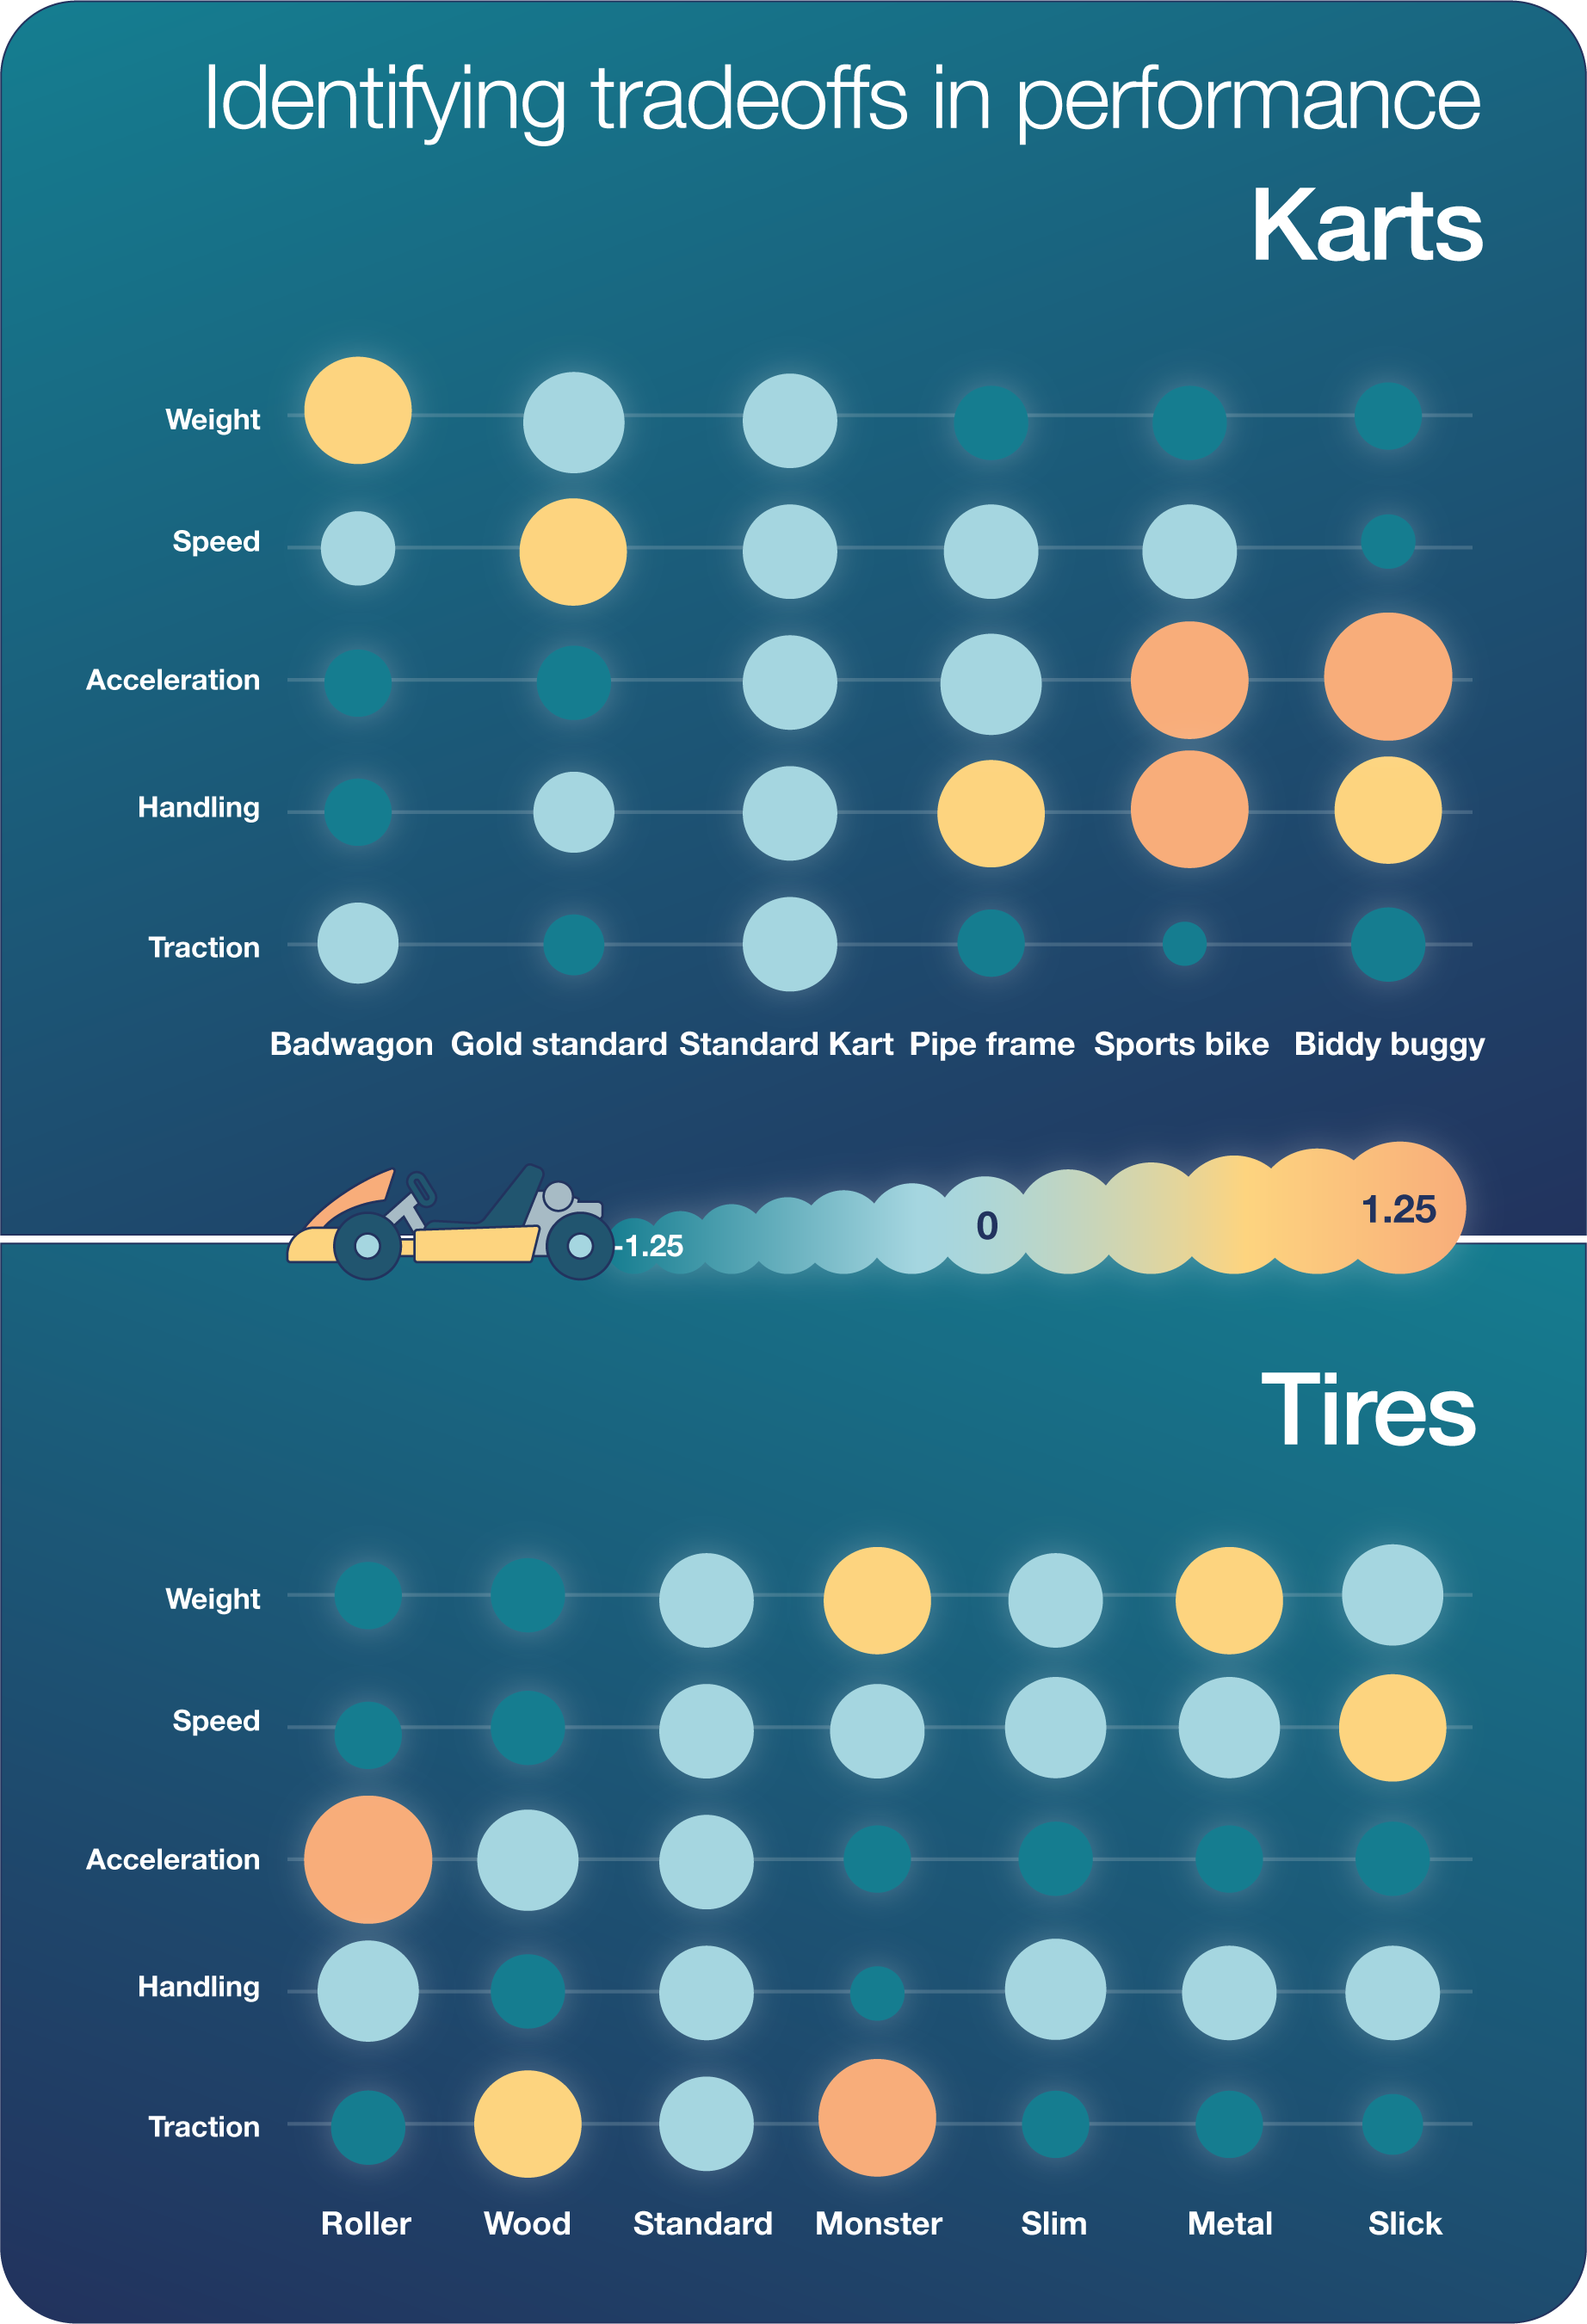 Identifying tradeoffs in performance for Karts vs Tires